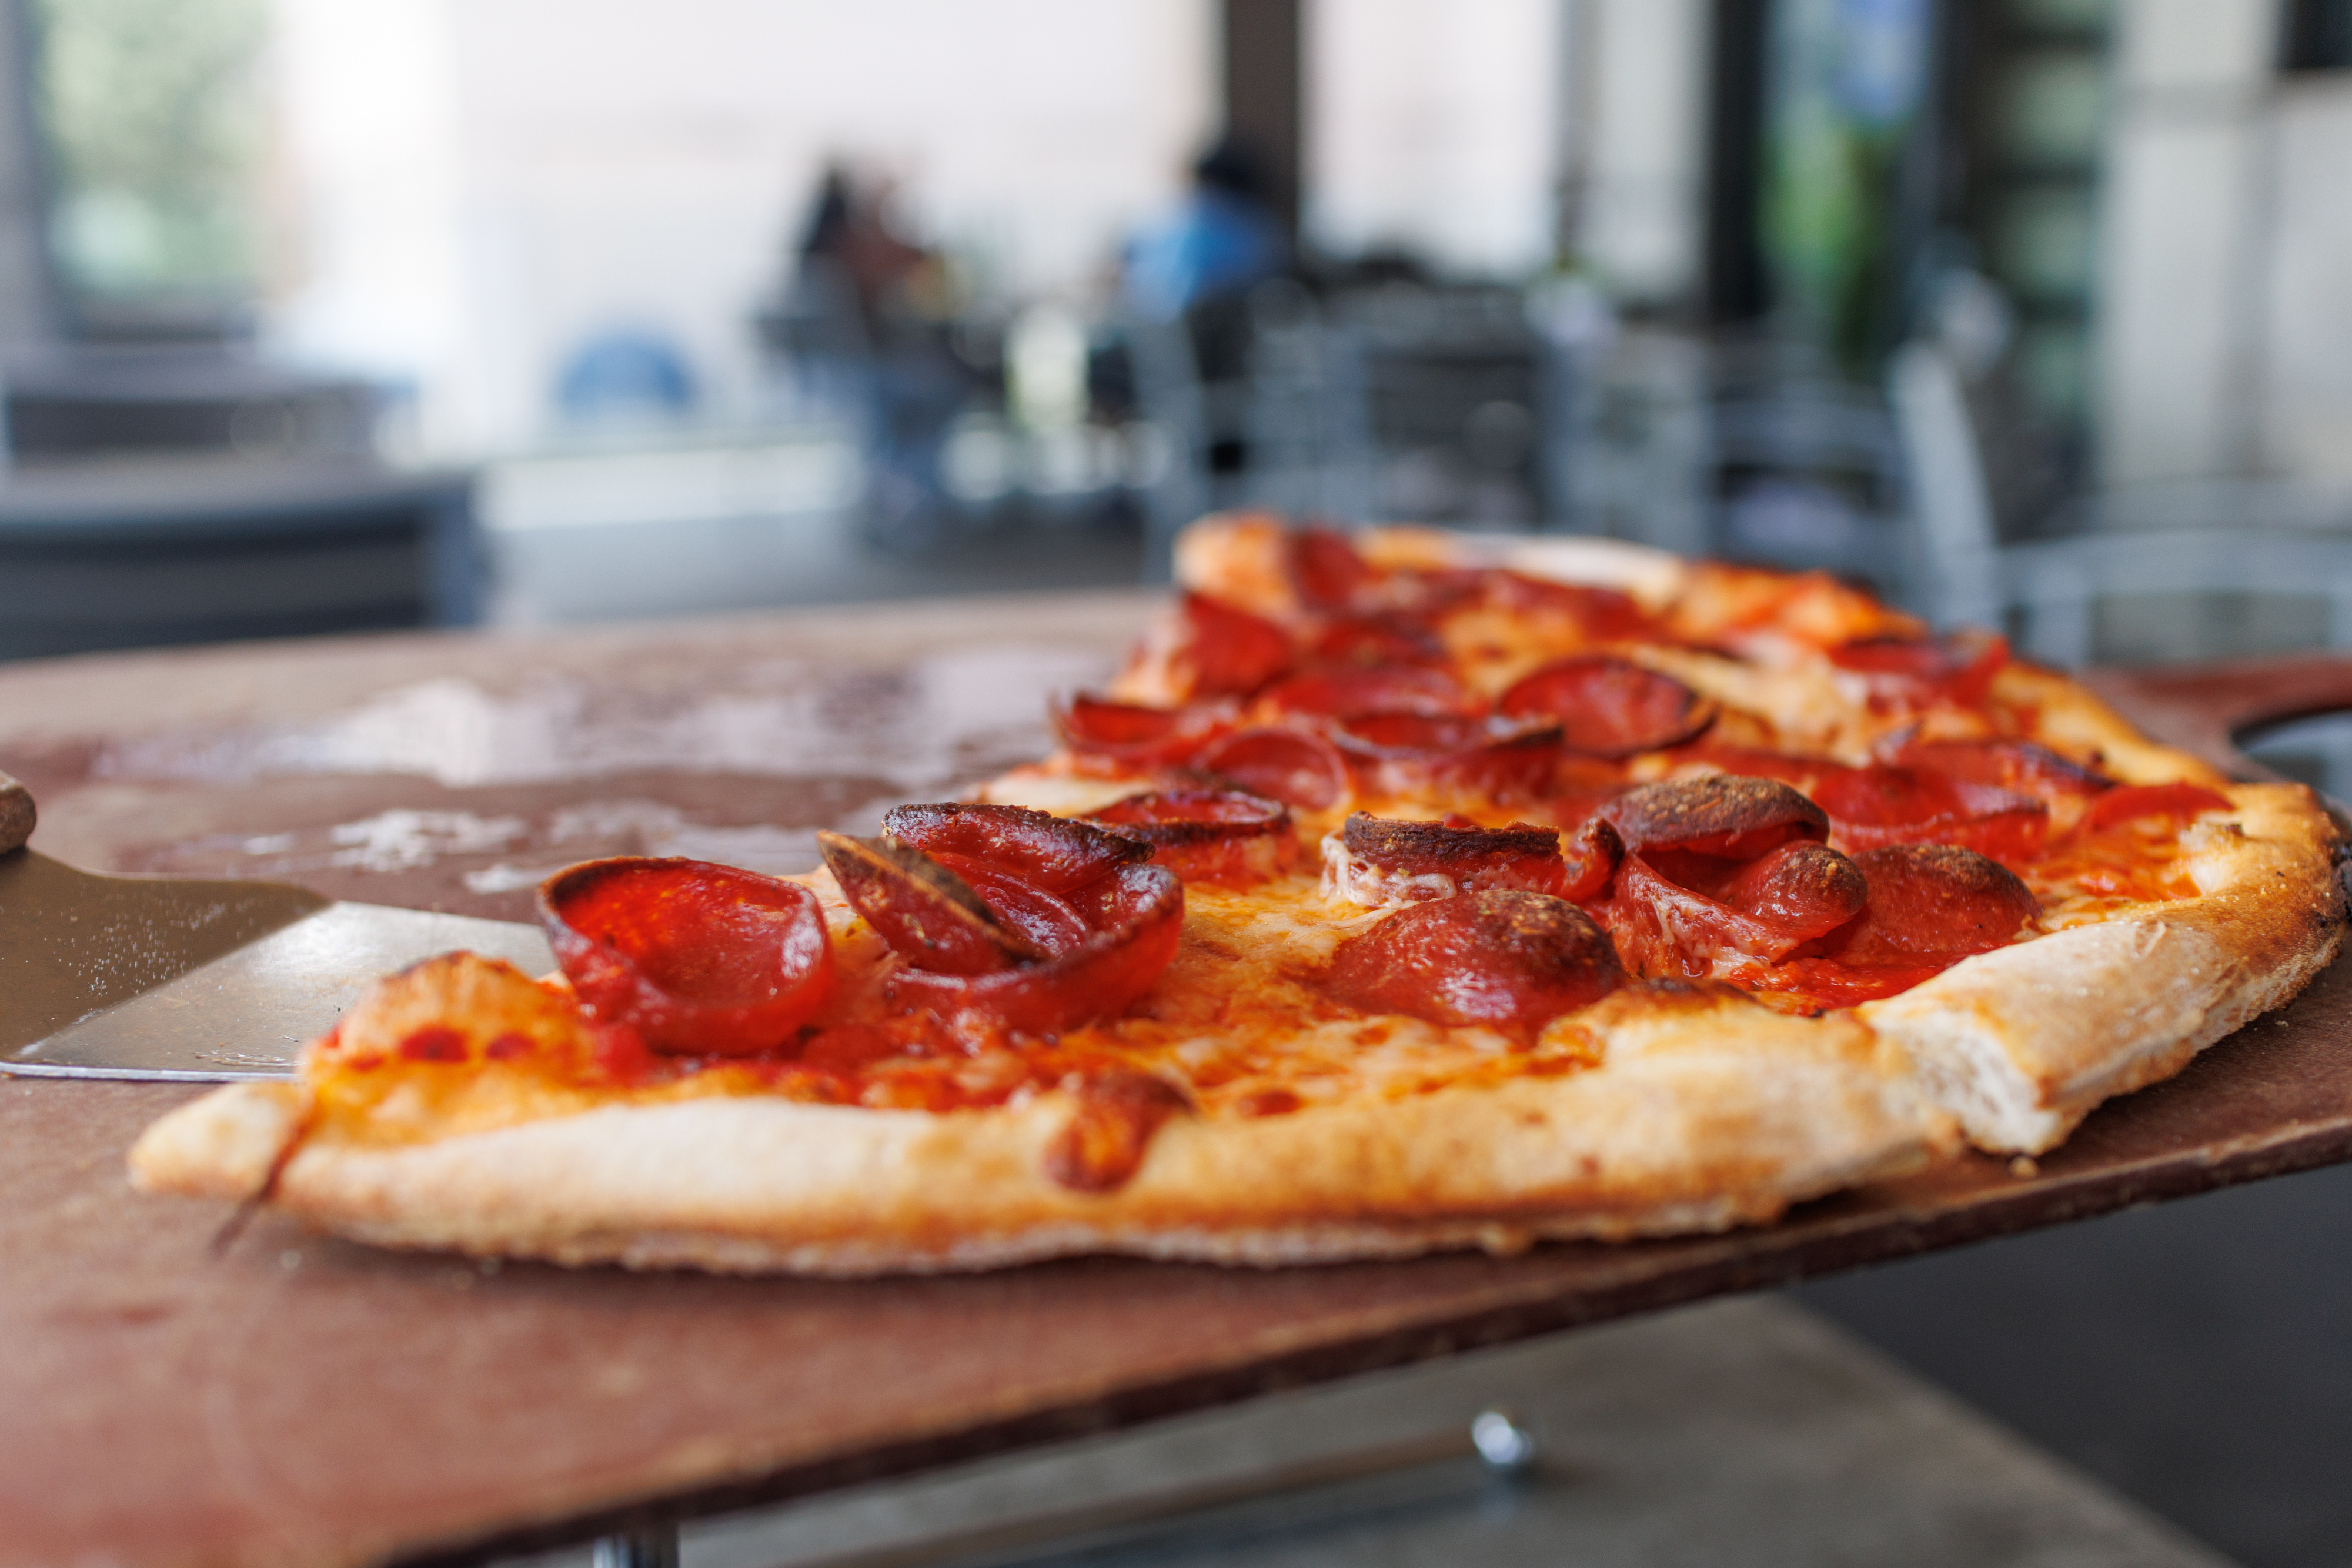 A pepperoni pizza with a visibly crispy crust sits on a wooden peel, ready to be served. No people in image